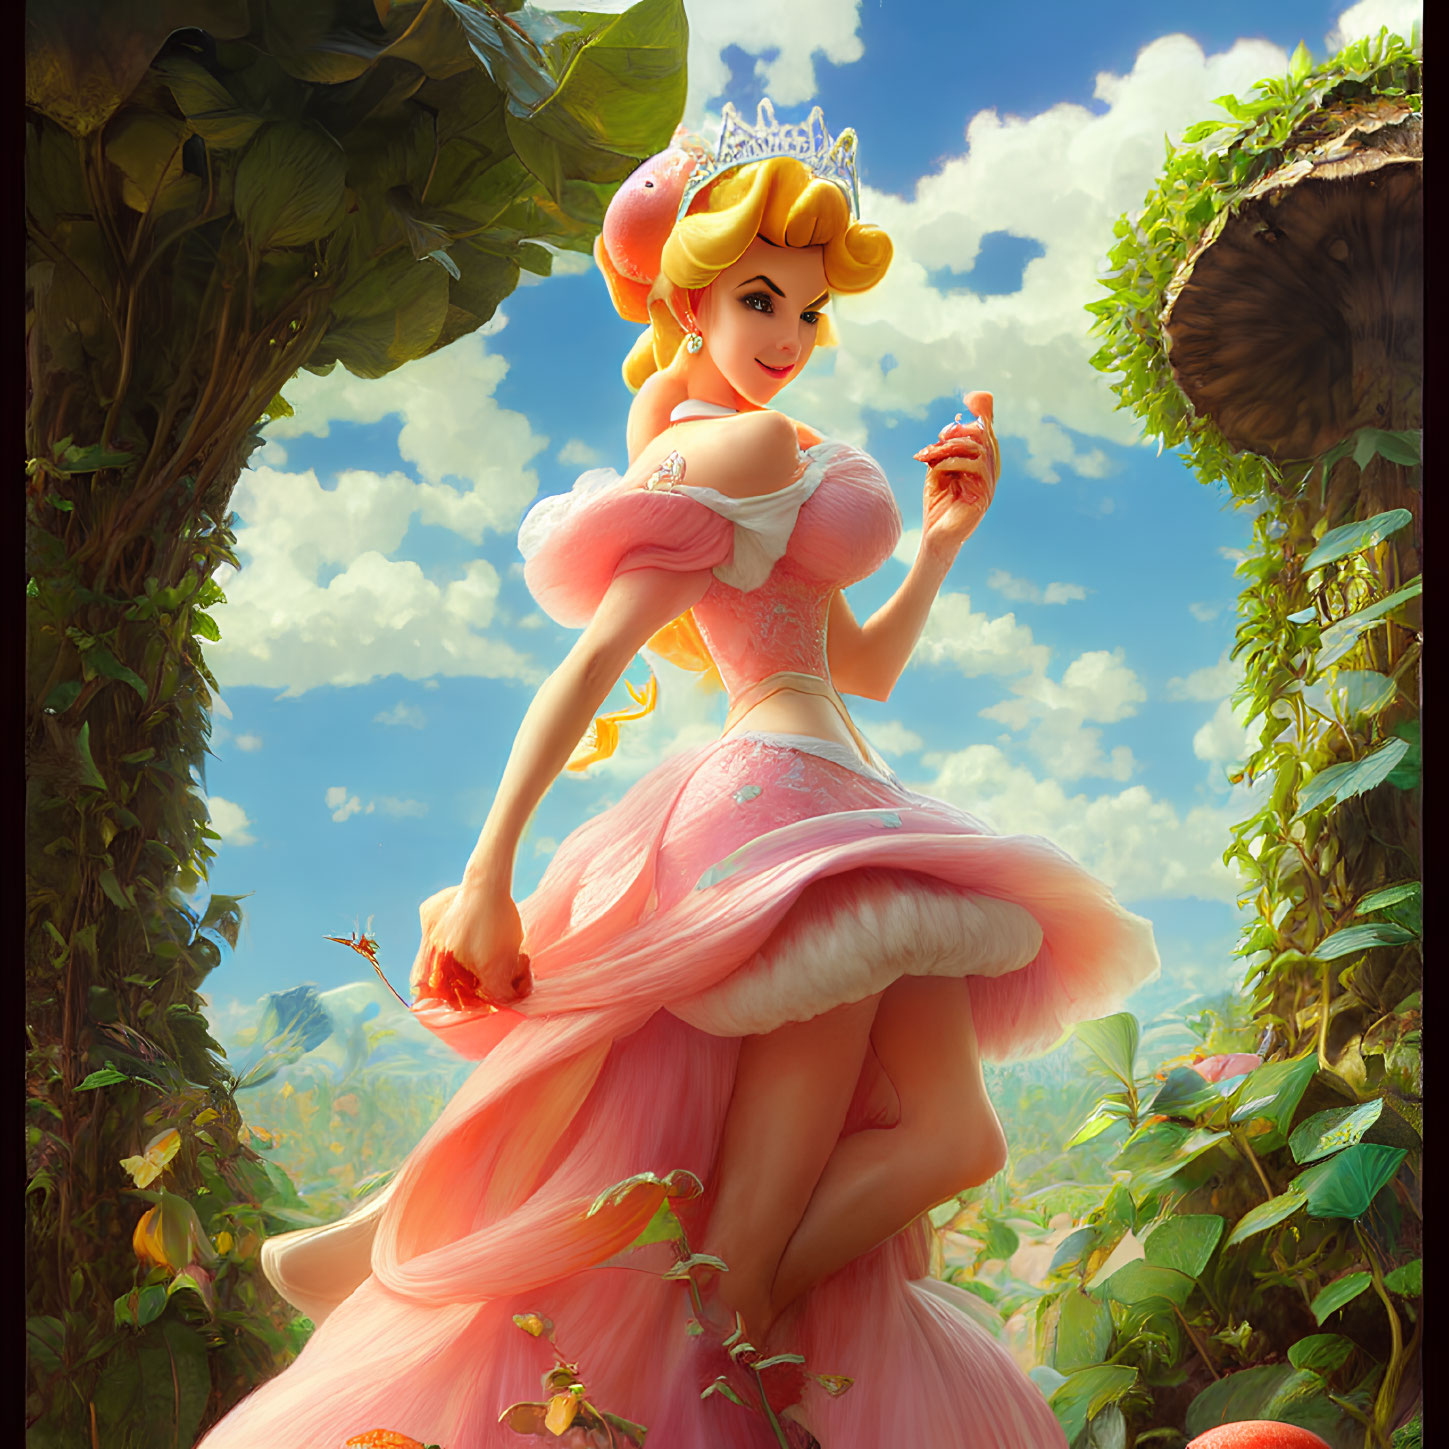 Princess in Pink Gown and Tiara in Lush Forest